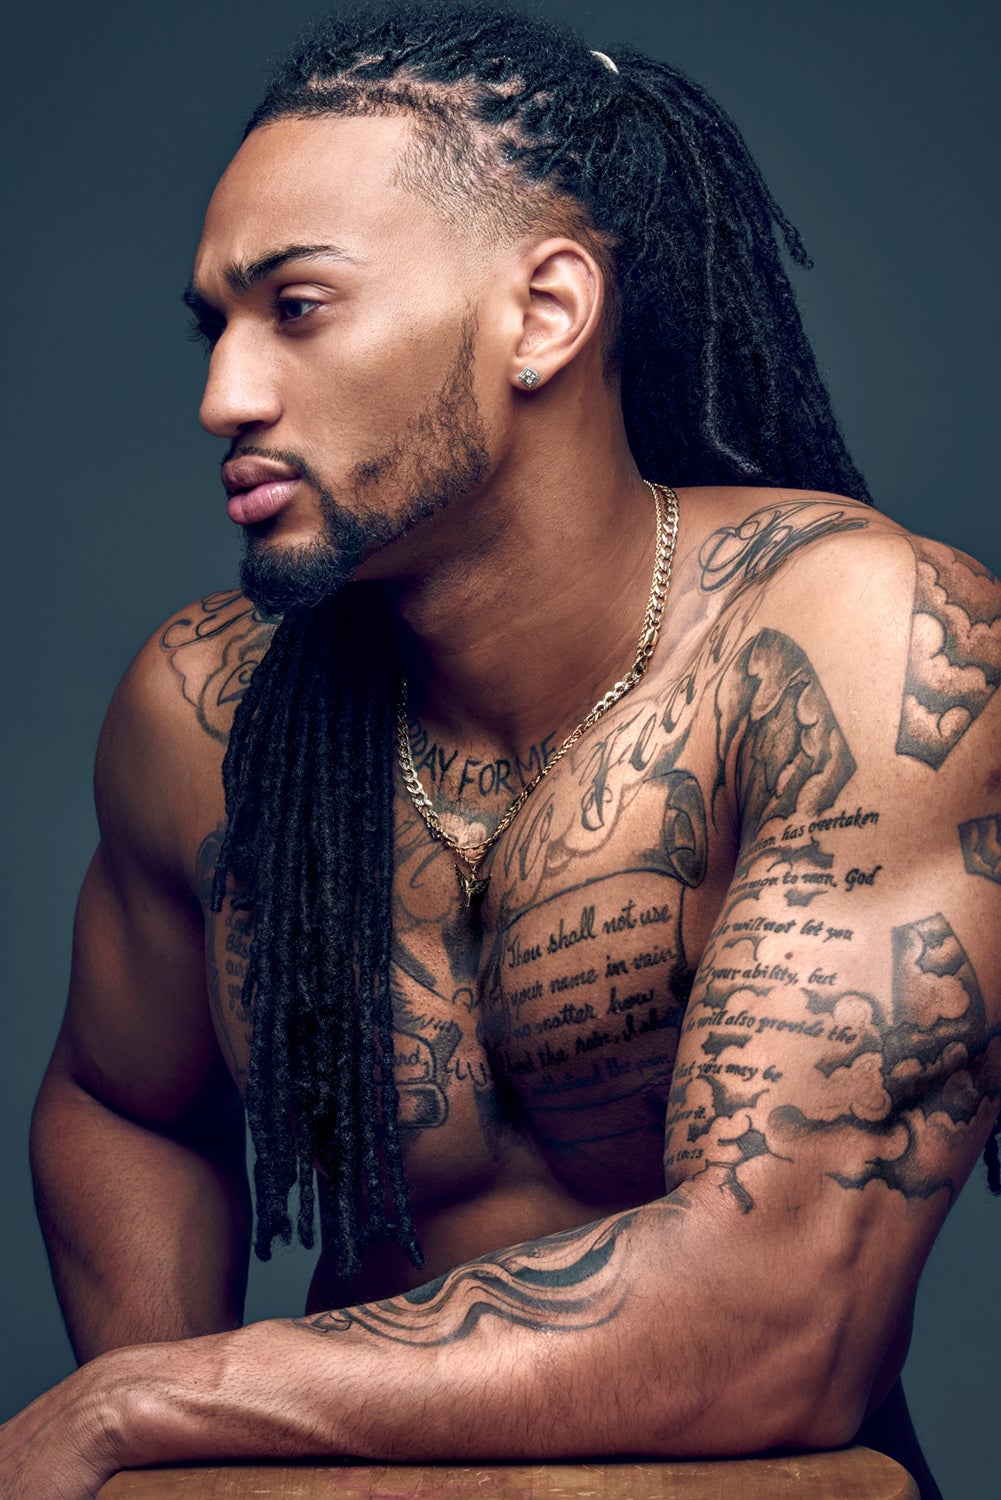 Zaddy Alert! 18 Fine Men On Instagram Who Want To Be Your #MCM
